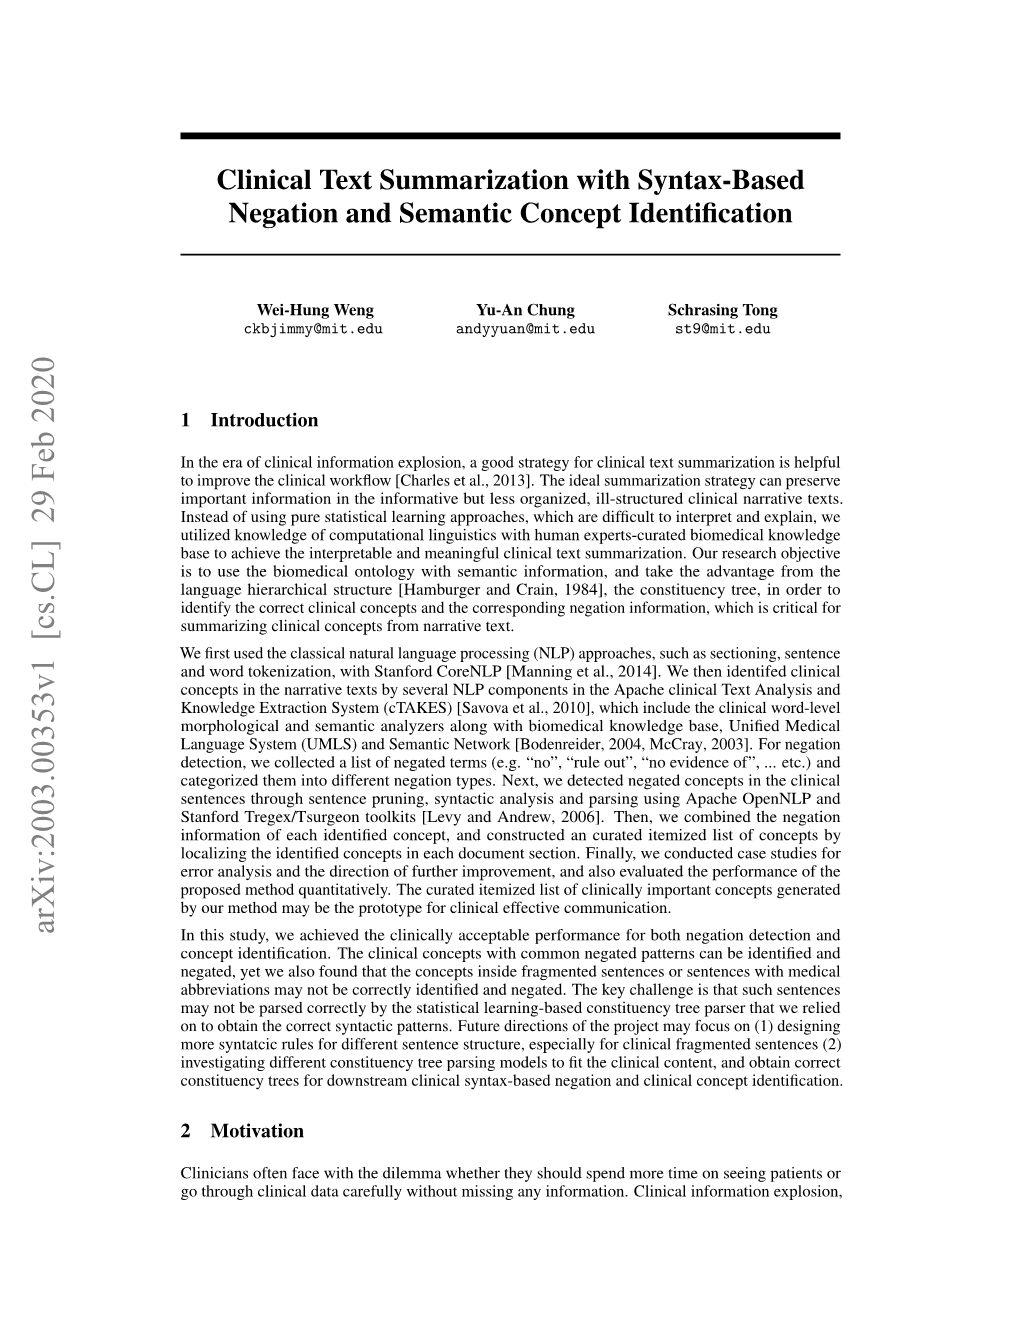 Clinical Text Summarization with Syntax-Based Negation and Semantic Concept Identification